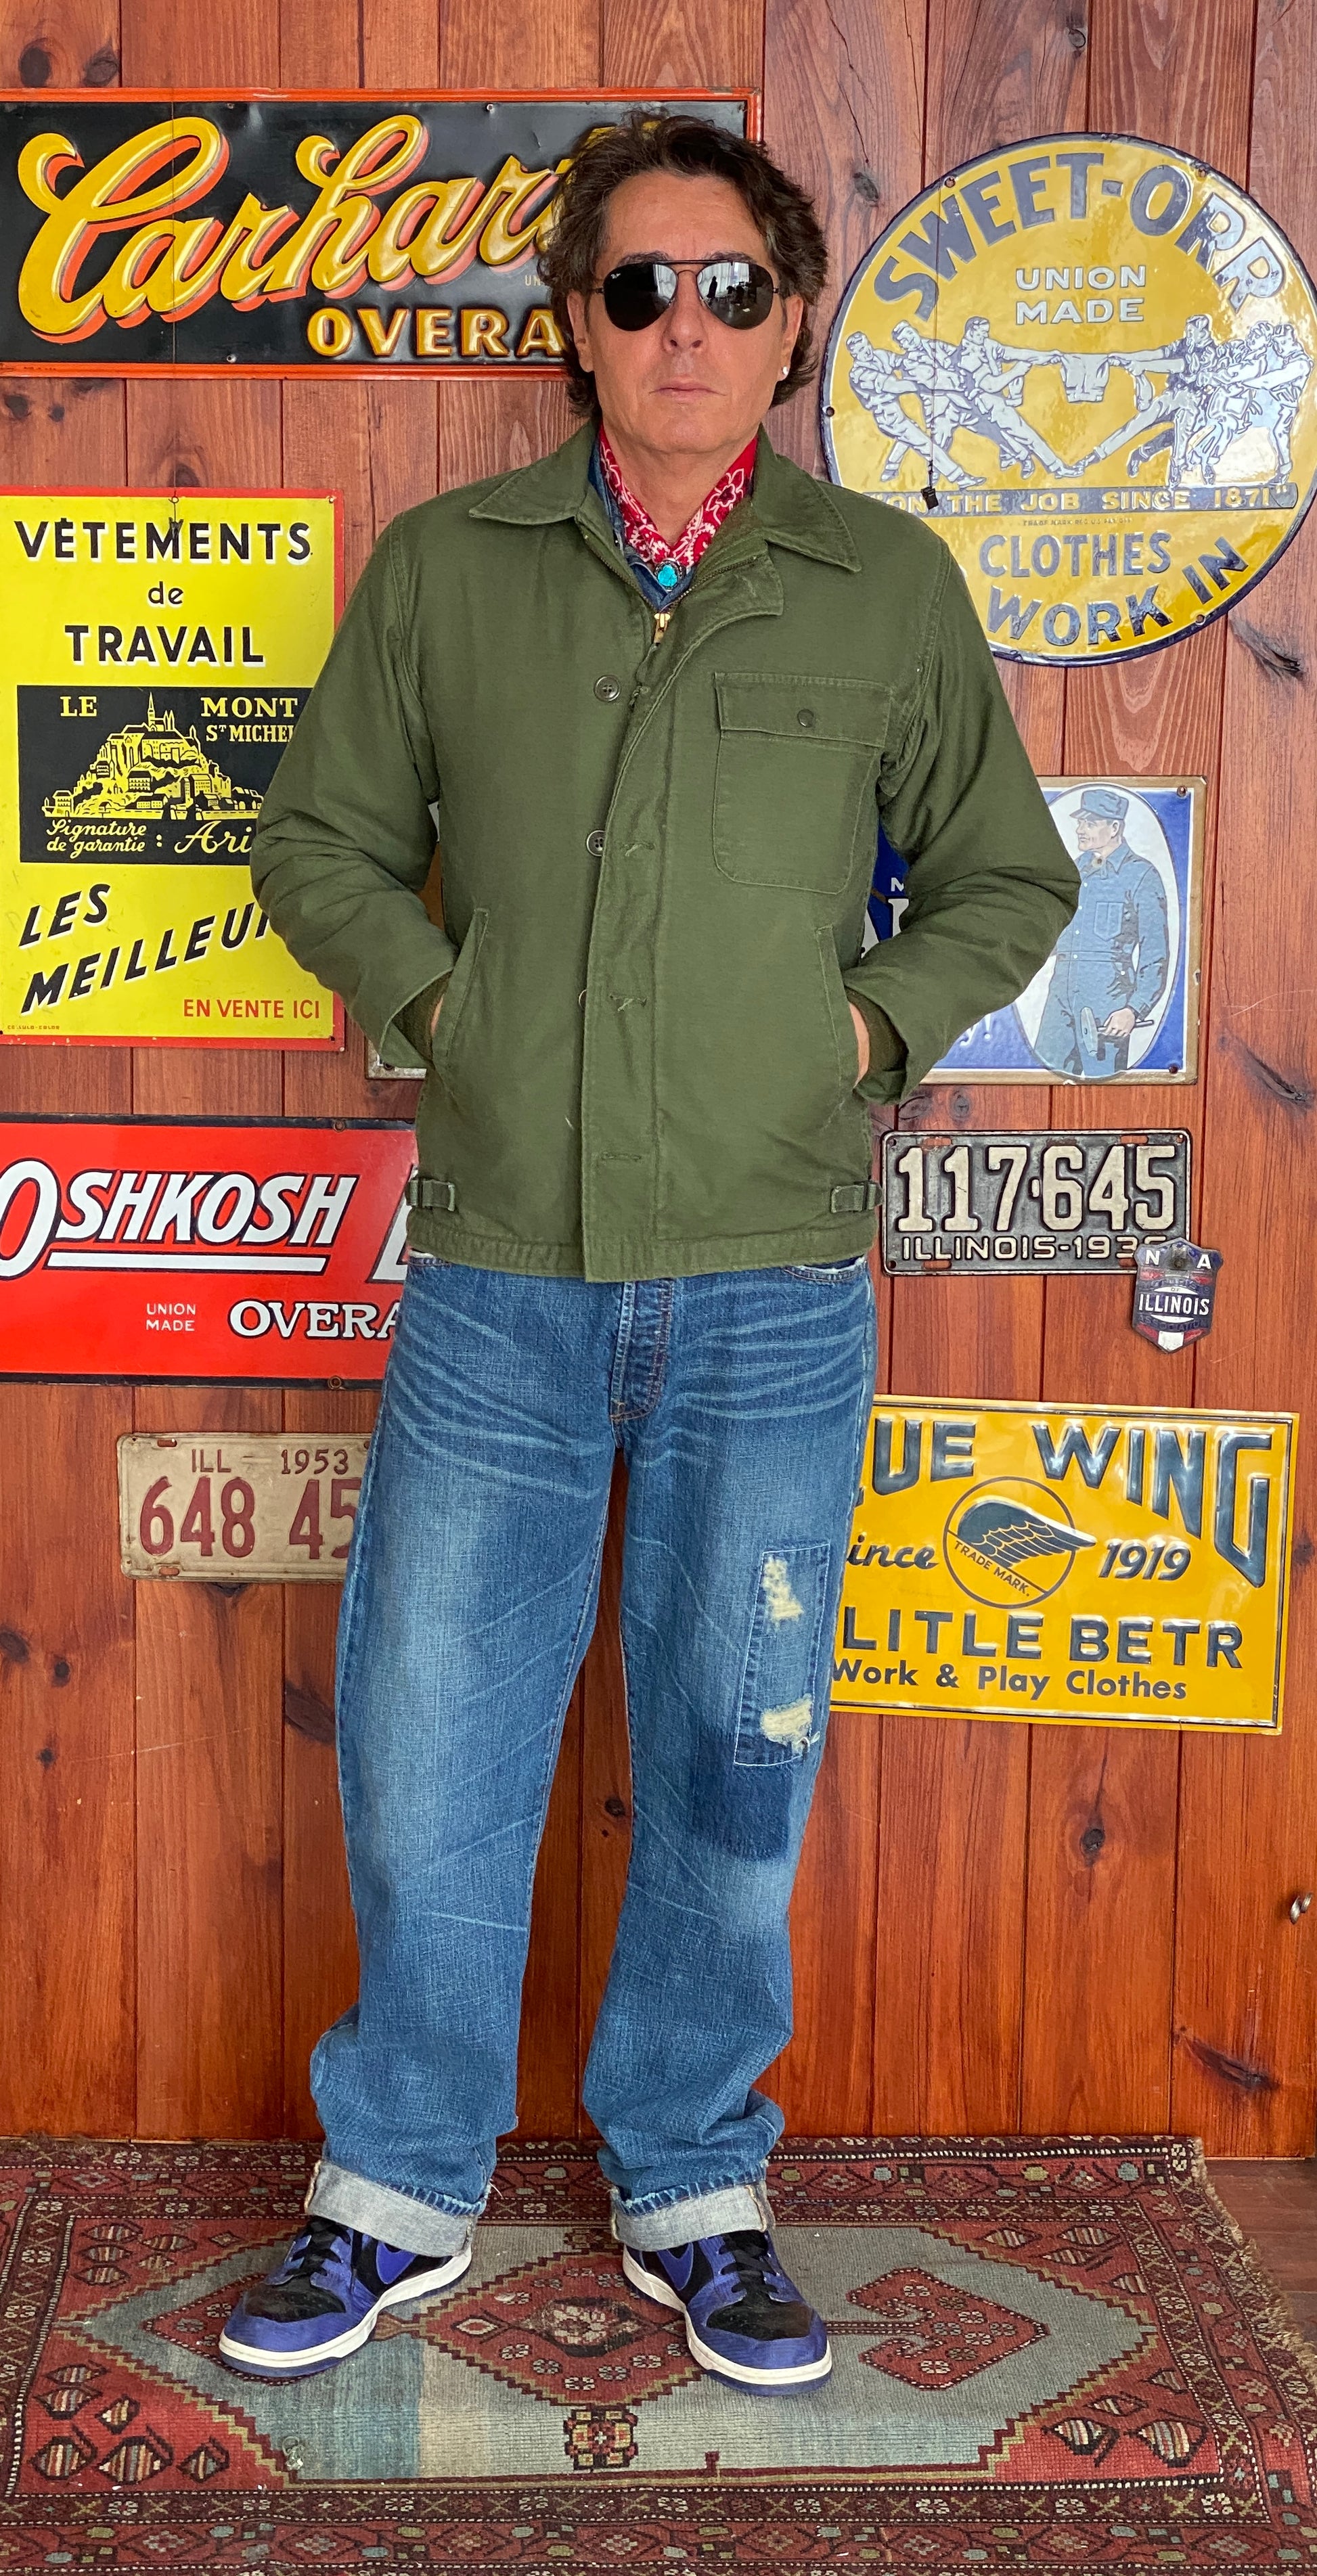 Authentic 1981 USN A2 Deck Jacket in Classic Olive Green | Vintage US Navy Apparel with Iconic Style, Durability, and Quality Craftsmanship